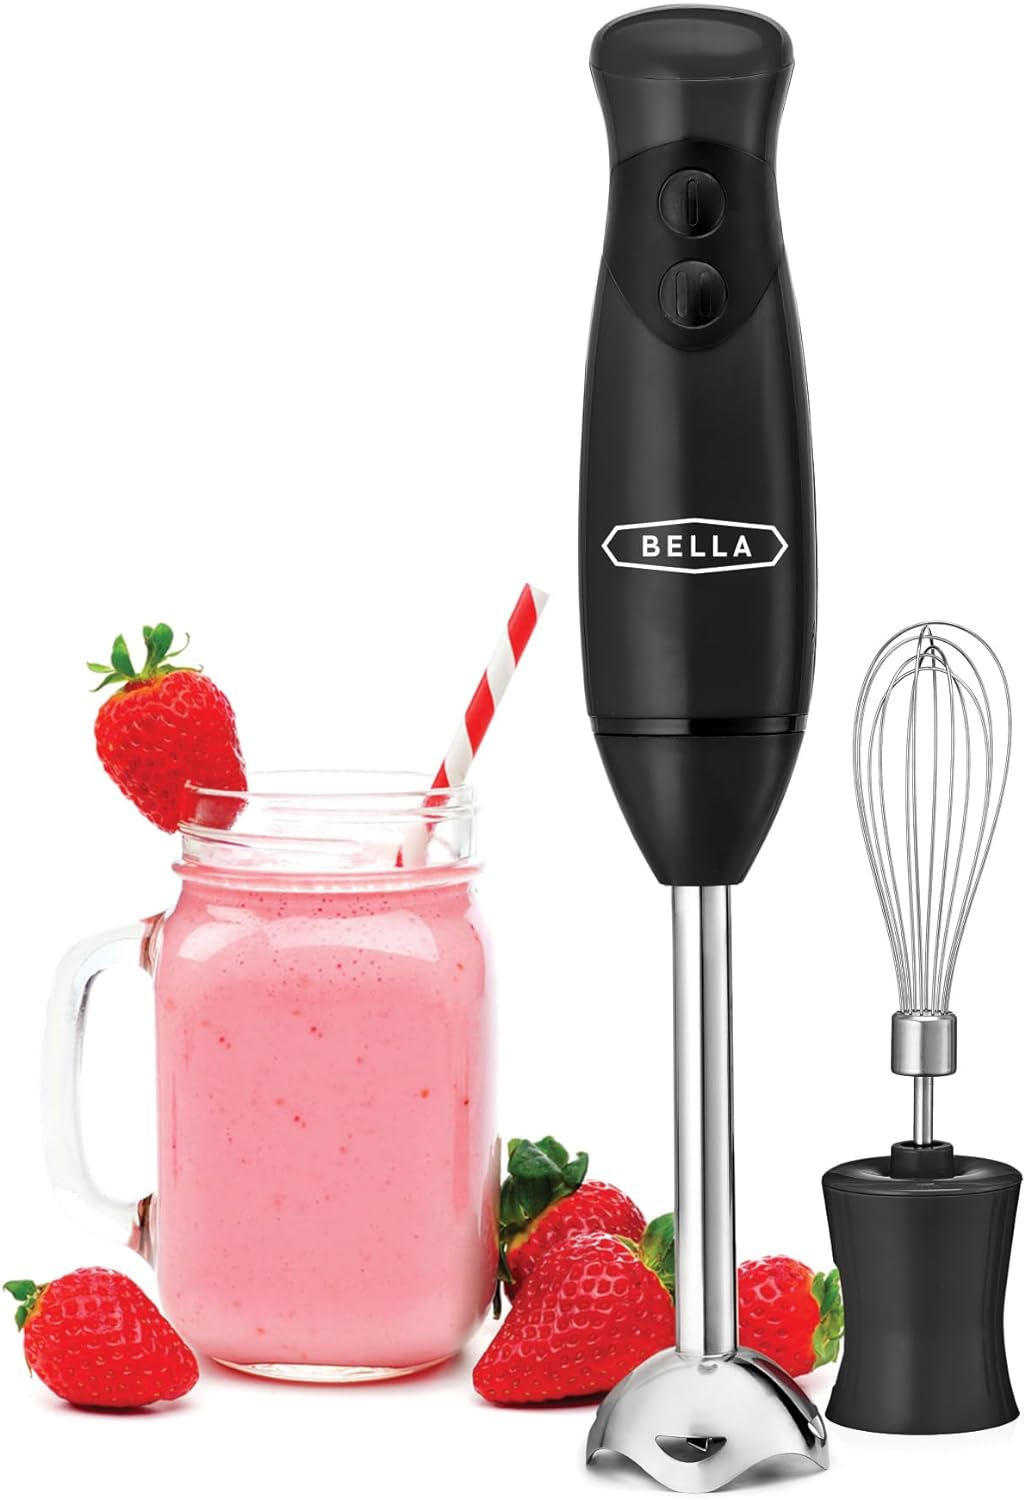 BELLA Immersion Hand Blender, Portable Mixer with Whisk Attachment - Electric Handheld Juicer, Shakes, Baby Food and Smoothie Maker, Stainless Steel, Black